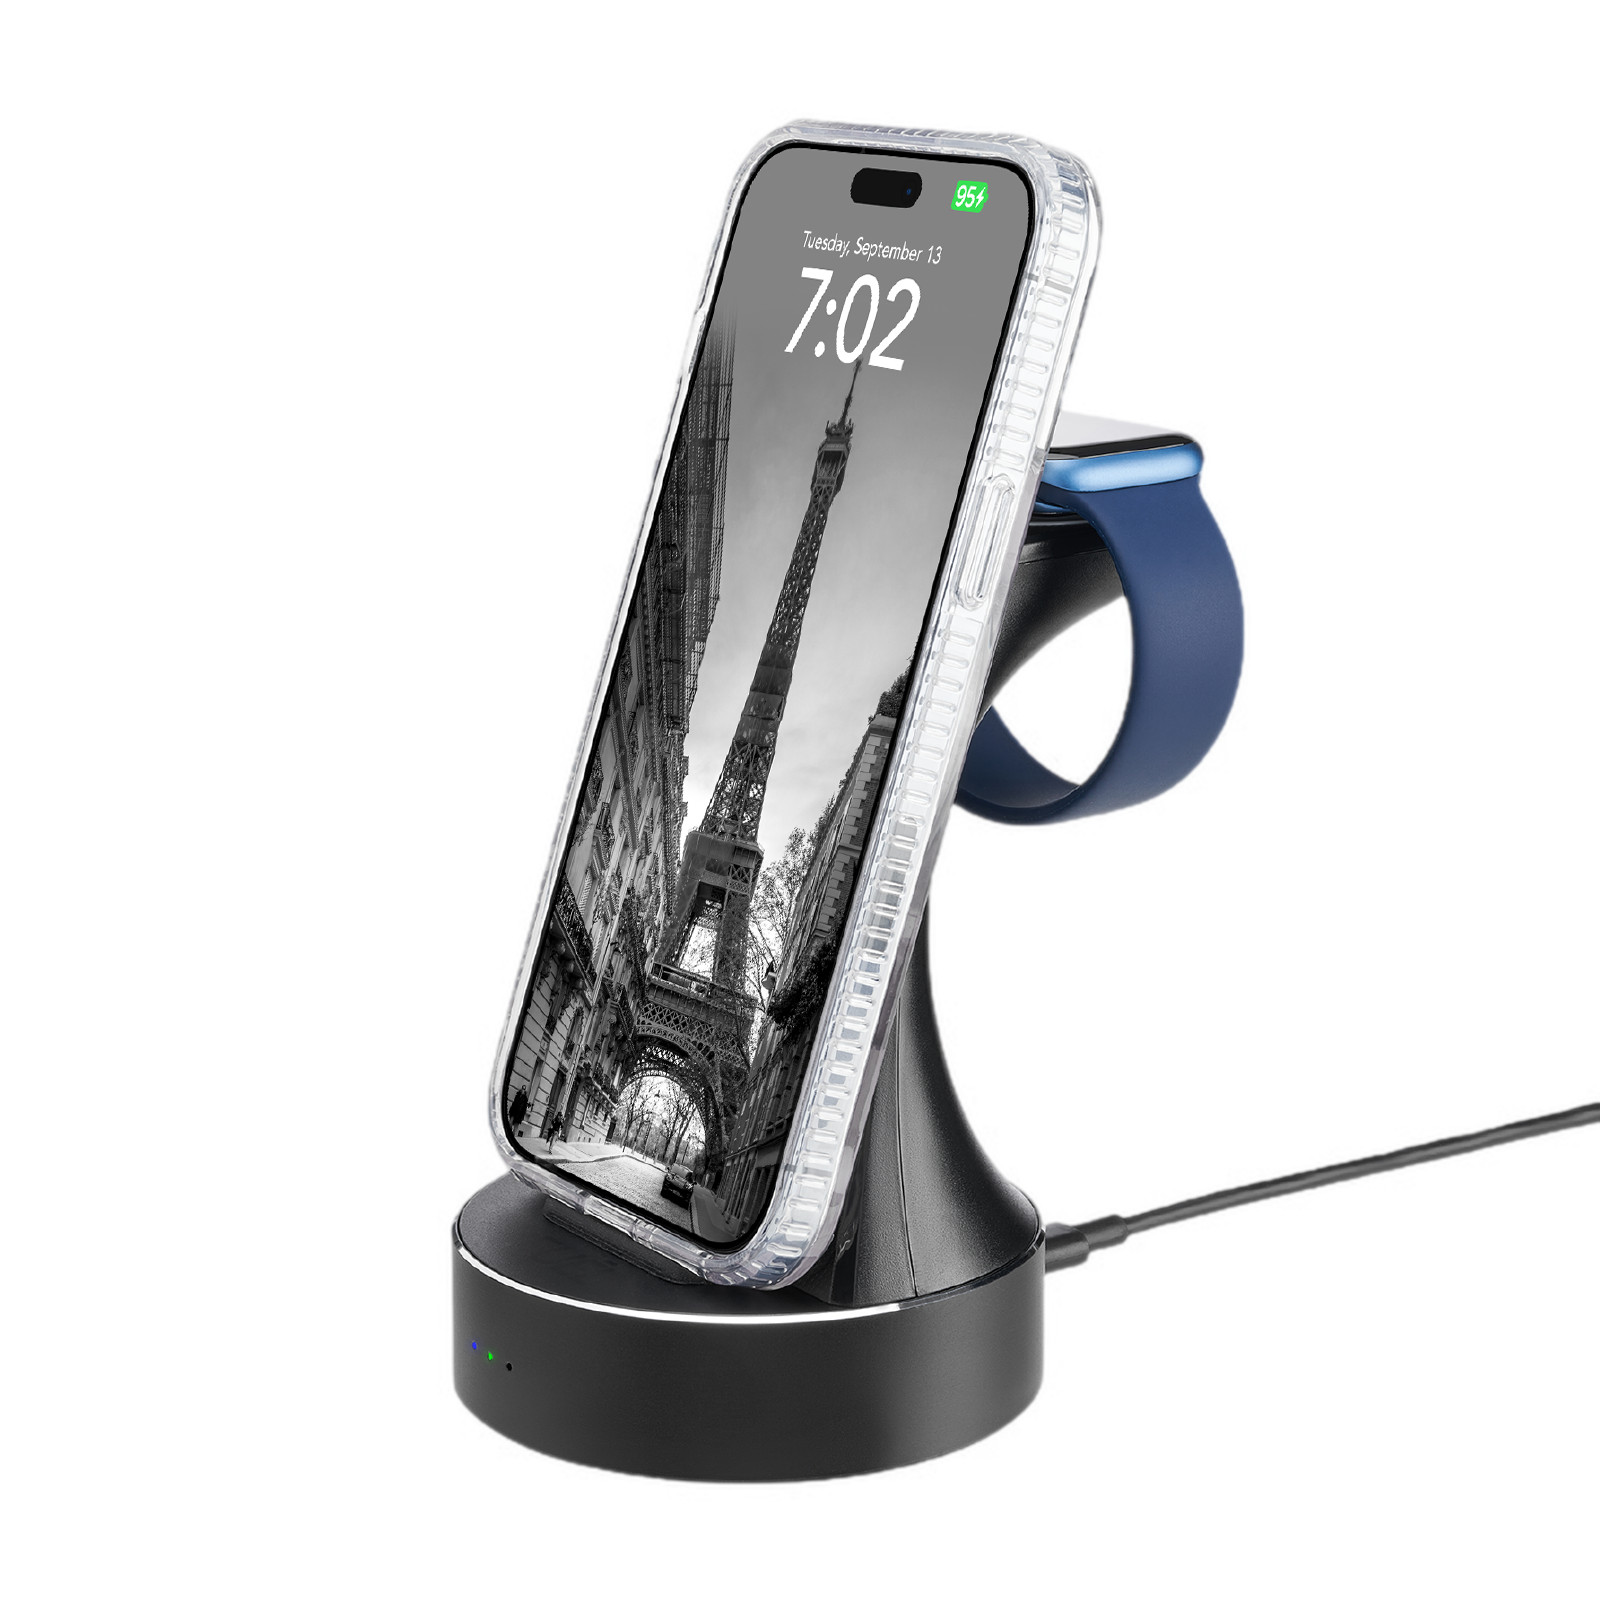 Fuel 2 in 1 Wireless Charging Station